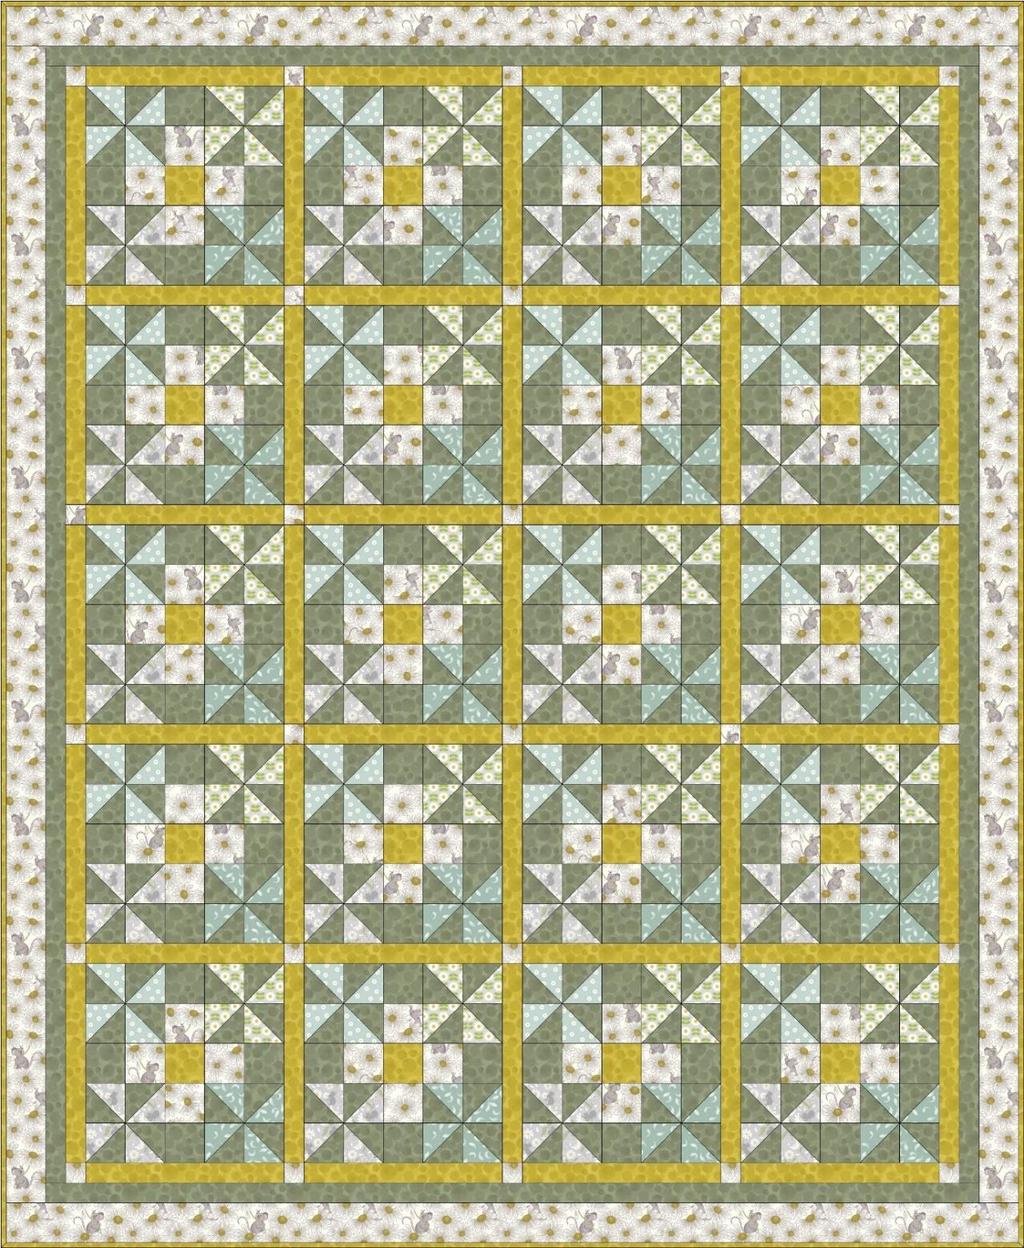 Love Me Love Me Not Quilt Designed and made by Sally Ablett Size: 51 x 62 Block: 10½ x 10½ DESIGN 1 (Main Diagram) FABRIC REQUIREMENTS (Love Me Love Me Not Collection) Fabric 1: 1yd - 1mtr - A271.